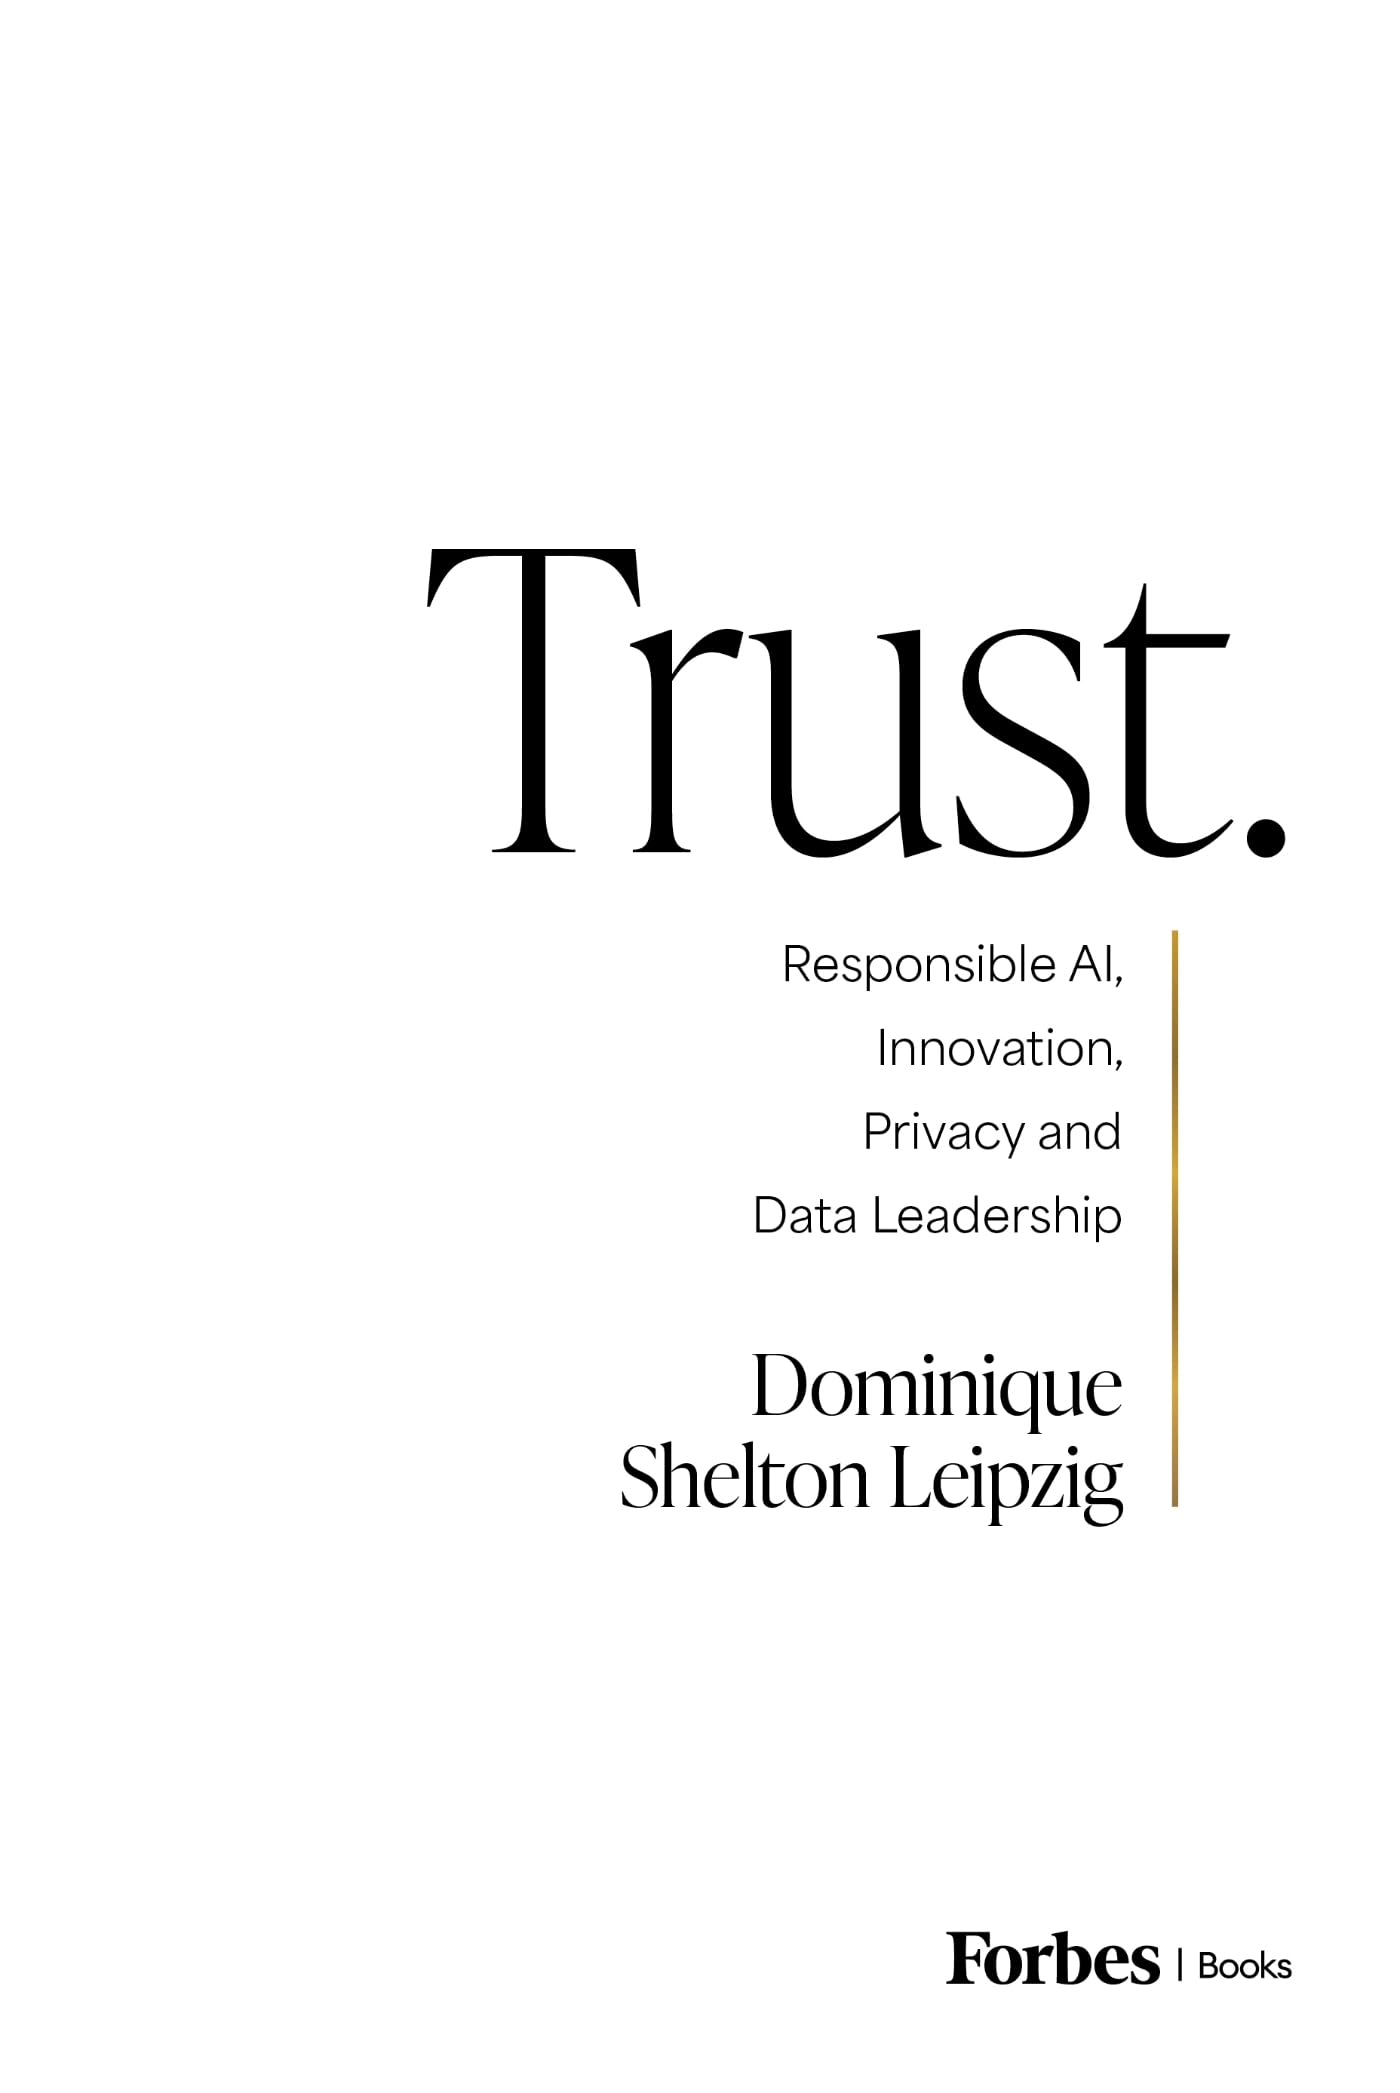 Trust.: Responsible AI, Innovation, Privacy and Data Leadership